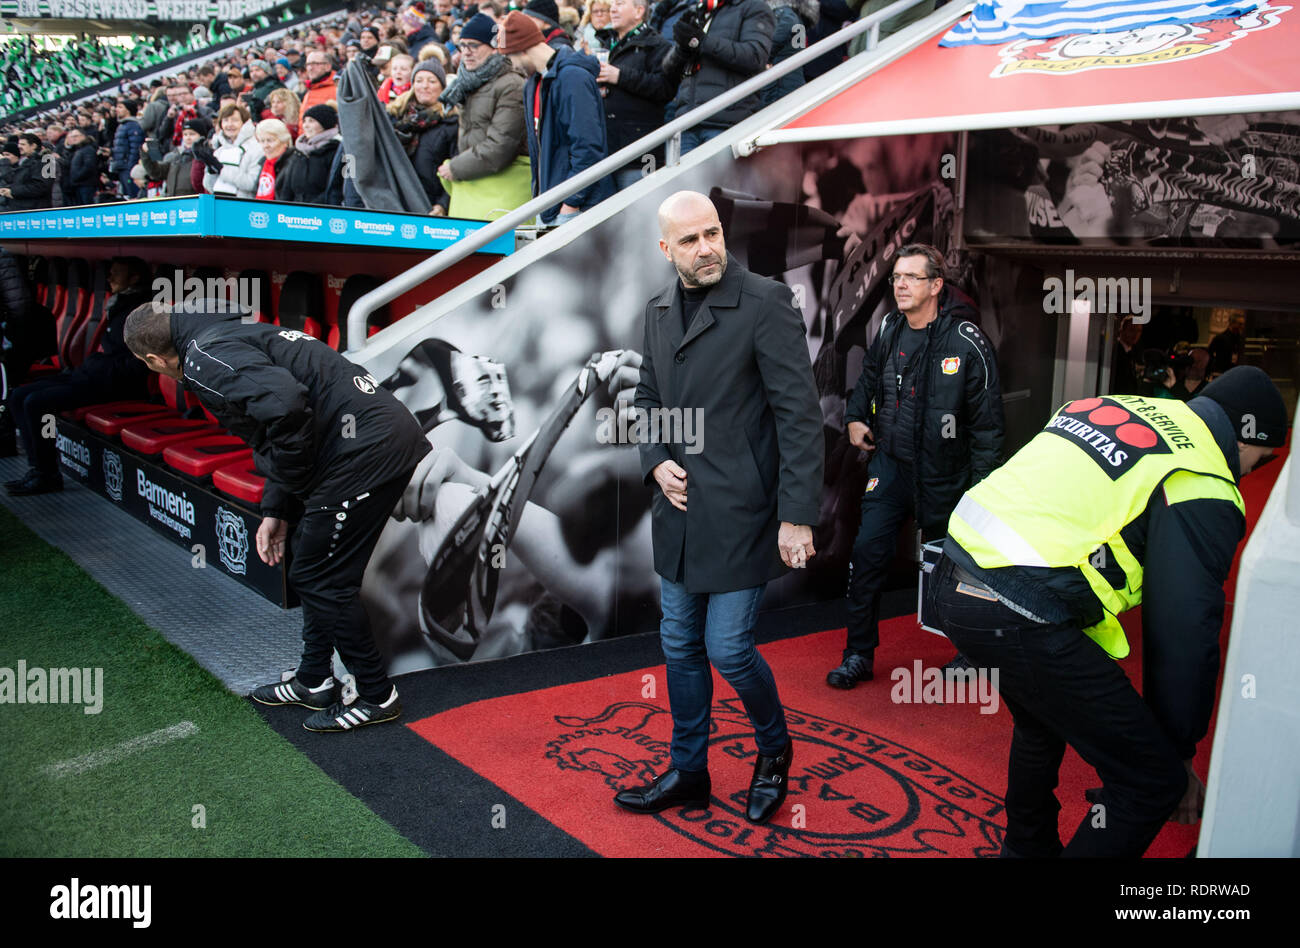 Leverkusen, Germany. 19th Jan, 2019. Soccer: Bundesliga, Bayer Leverkusen - Bor. Mönchengladbach, 18th matchday in the BayArena: Leverkusen coach Peter Bosz comes out of the play tunnel. Credit: Bernd Thissen/dpa - IMPORTANT NOTE: In accordance with the requirements of the DFL Deutsche Fußball Liga or the DFB Deutscher Fußball-Bund, it is prohibited to use or have used photographs taken in the stadium and/or the match in the form of sequence images and/or video-like photo sequences./dpa/Alamy Live News Stock Photo